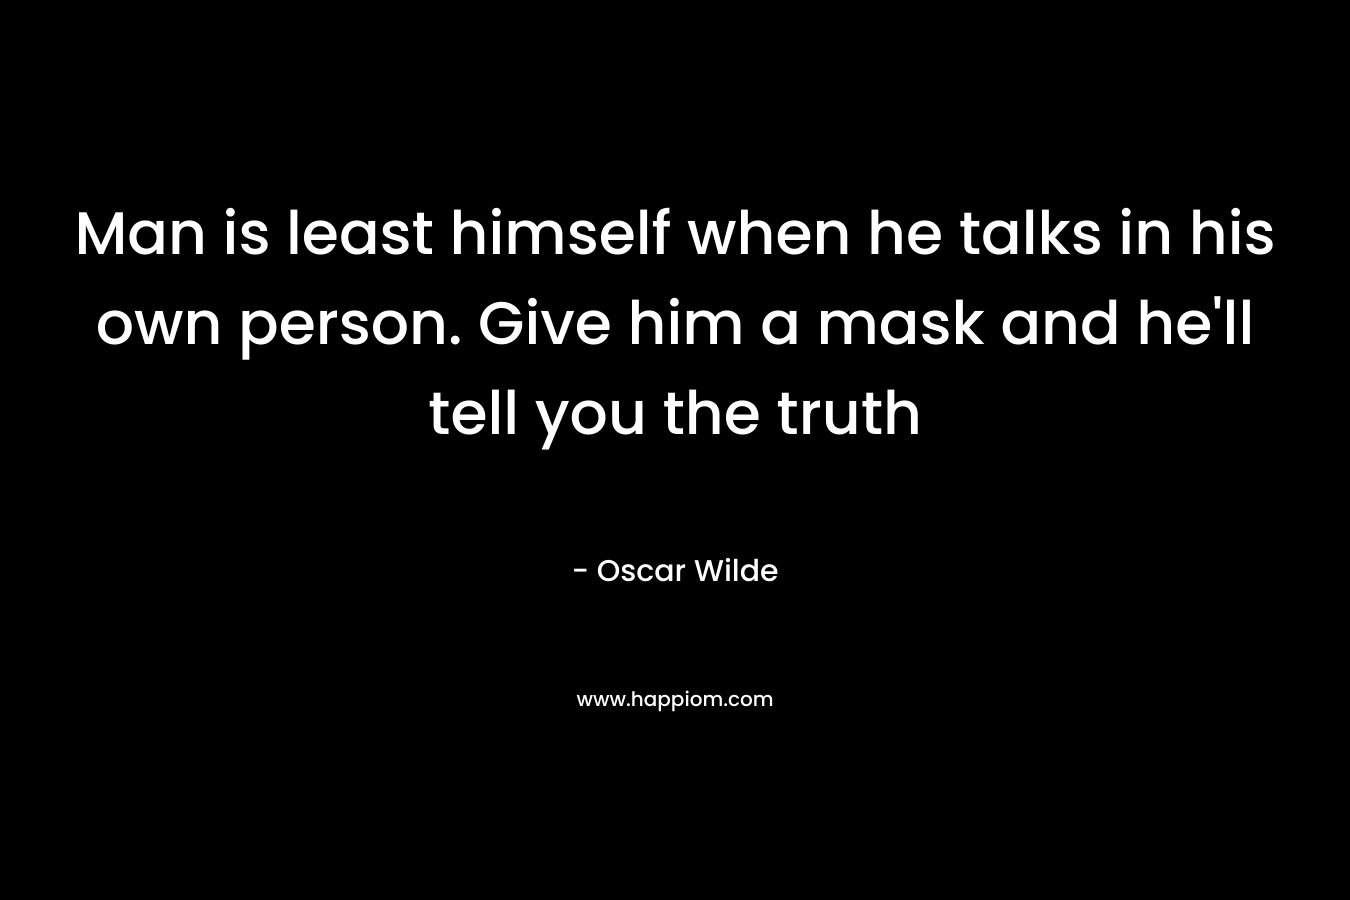 Man is least himself when he talks in his own person. Give him a mask and he’ll tell you the truth – Oscar Wilde